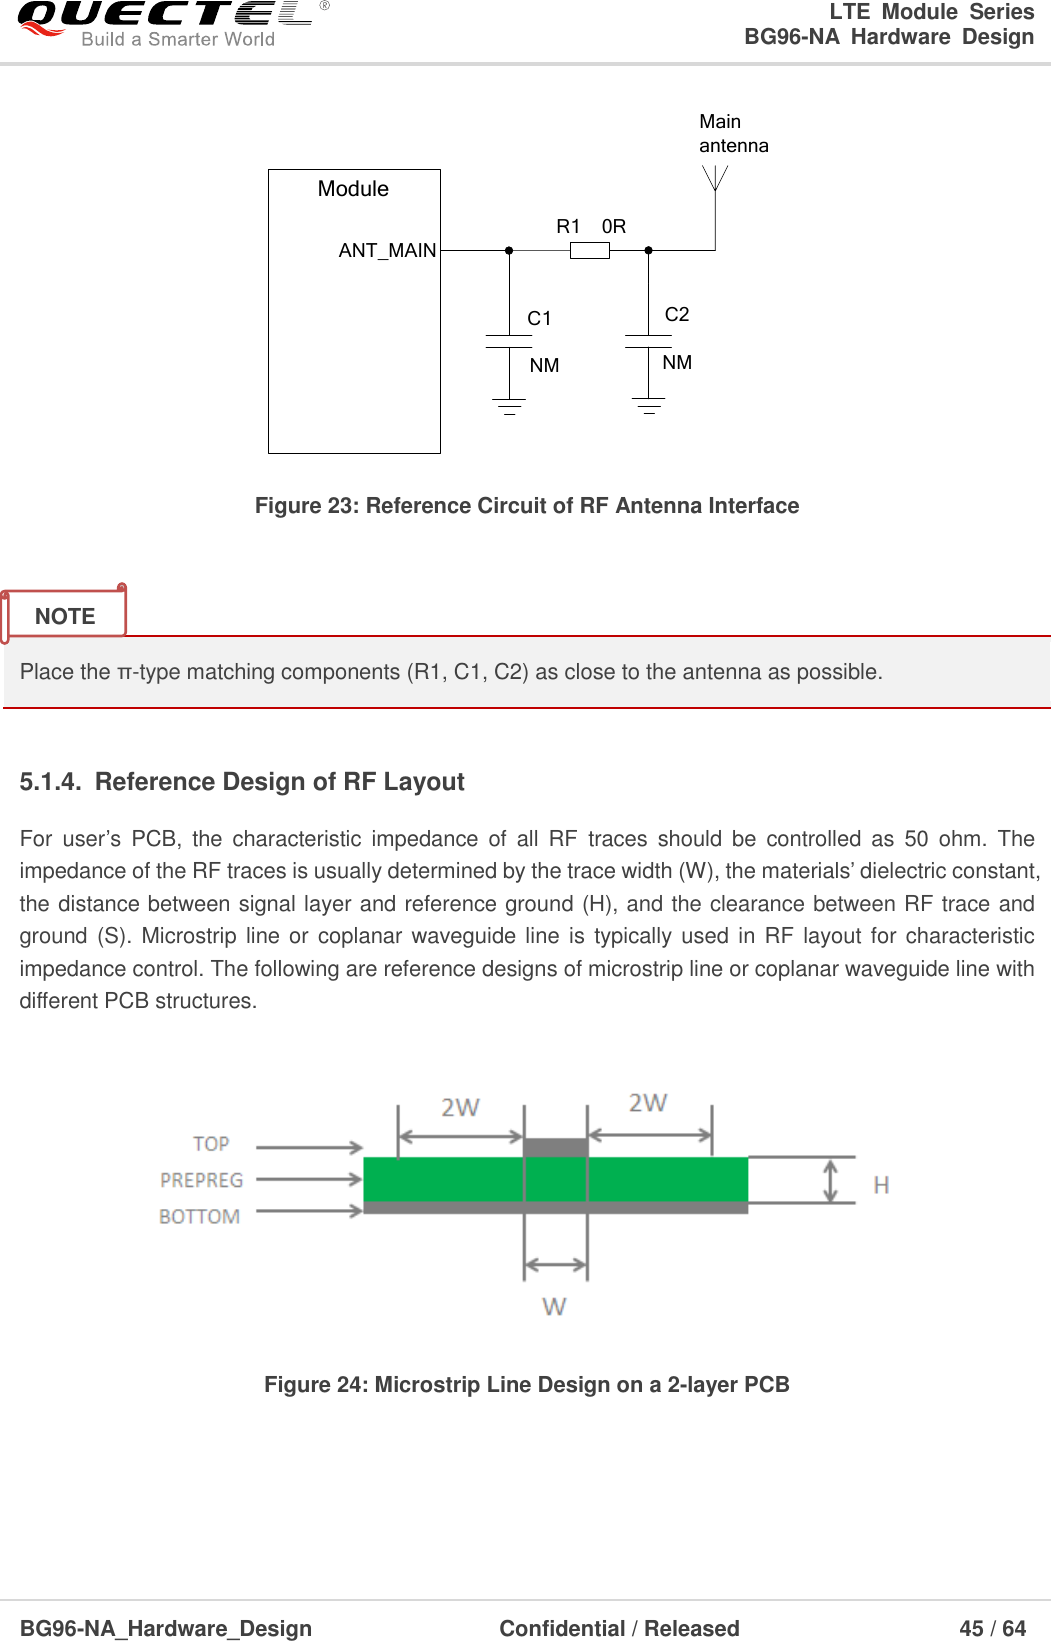 LTE  Module  Series                                                  BG96-NA  Hardware  Design  BG96-NA_Hardware_Design                              Confidential / Released                                  45 / 64    ANT_MAINR1    0RC1ModuleMainantennaNMC2NM Figure 23: Reference Circuit of RF Antenna Interface   Place the π-type matching components (R1, C1, C2) as close to the antenna as possible.    5.1.4.  Reference Design of RF Layout   For  user’s PCB,  the  characteristic  impedance  of  all  RF  traces should  be  controlled  as  50  ohm.  The impedance of the RF traces is usually determined by the trace width (W), the materials’ dielectric constant, the distance between signal layer and reference ground (H), and the clearance between RF trace and ground (S). Microstrip line or  coplanar waveguide line is typically used in RF layout for characteristic impedance control. The following are reference designs of microstrip line or coplanar waveguide line with different PCB structures.    Figure 24: Microstrip Line Design on a 2-layer PCB  NOTE 